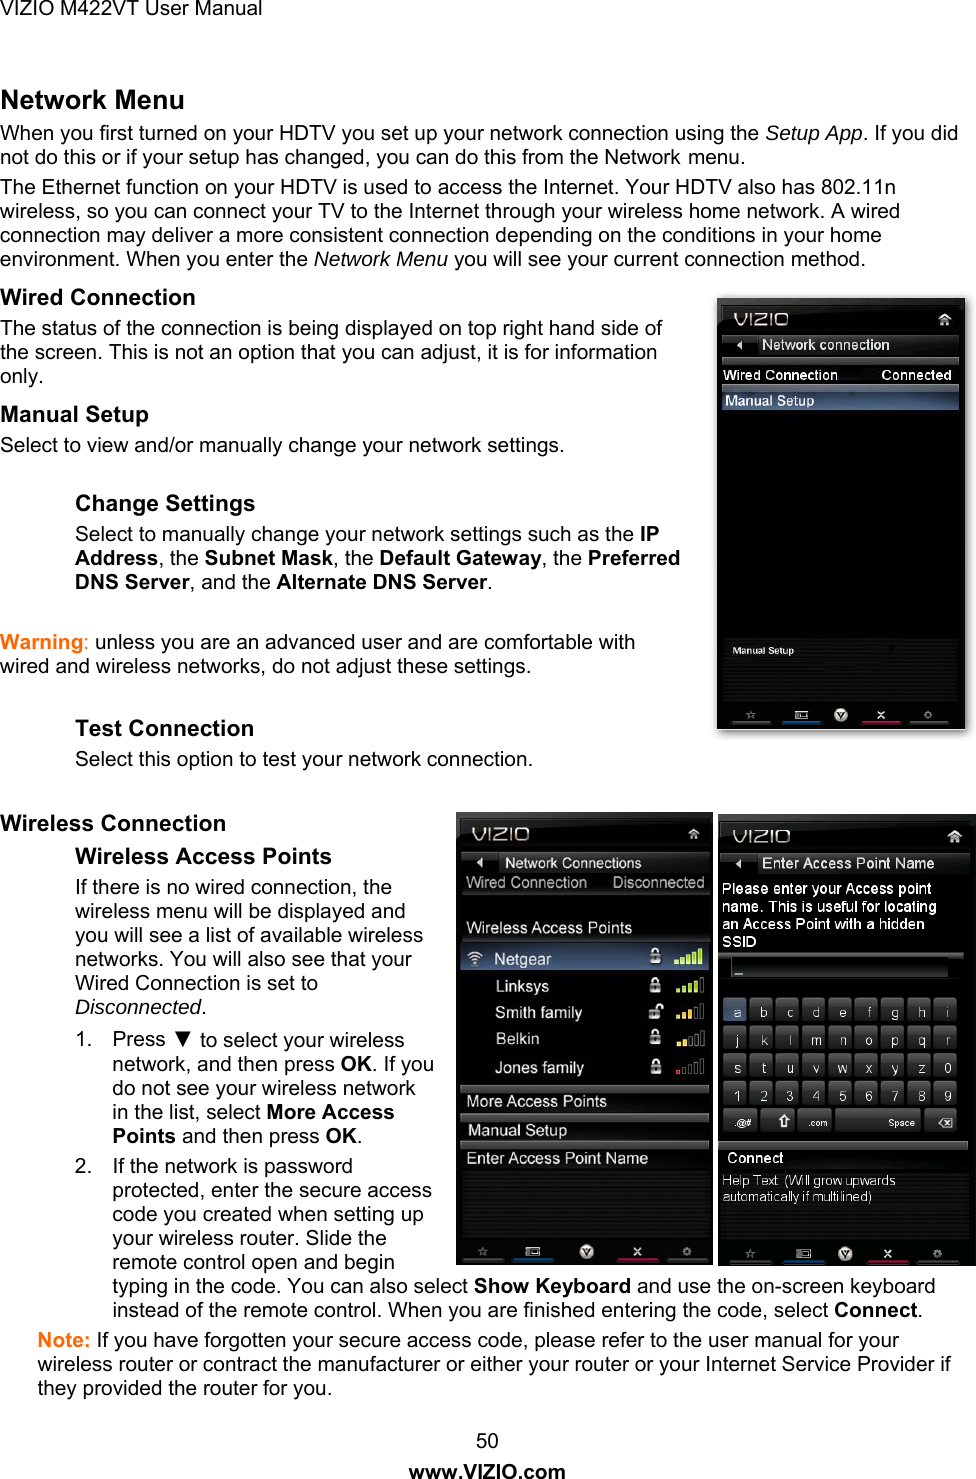 VIZIO M422VT User Manual 50 www.VIZIO.com Network Menu When you first turned on your HDTV you set up your network connection using the Setup App. If you did not do this or if your setup has changed, you can do this from the Network menu. The Ethernet function on your HDTV is used to access the Internet. Your HDTV also has 802.11n wireless, so you can connect your TV to the Internet through your wireless home network. A wired connection may deliver a more consistent connection depending on the conditions in your home environment. When you enter the Network Menu you will see your current connection method. Wired Connection The status of the connection is being displayed on top right hand side of the screen. This is not an option that you can adjust, it is for information only.  Manual Setup Select to view and/or manually change your network settings.  Change Settings Select to manually change your network settings such as the IP Address, the Subnet Mask, the Default Gateway, the Preferred DNS Server, and the Alternate DNS Server.   Warning: unless you are an advanced user and are comfortable with wired and wireless networks, do not adjust these settings.  Test Connection Select this option to test your network connection.  Wireless Connection Wireless Access Points If there is no wired connection, the wireless menu will be displayed and you will see a list of available wireless networks. You will also see that your Wired Connection is set to Disconnected. 1. Press ▼ to select your wireless network, and then press OK. If you do not see your wireless network in the list, select More Access Points and then press OK. 2.  If the network is password protected, enter the secure access code you created when setting up your wireless router. Slide the remote control open and begin typing in the code. You can also select Show Keyboard and use the on-screen keyboard instead of the remote control. When you are finished entering the code, select Connect. Note: If you have forgotten your secure access code, please refer to the user manual for your wireless router or contract the manufacturer or either your router or your Internet Service Provider if they provided the router for you. 